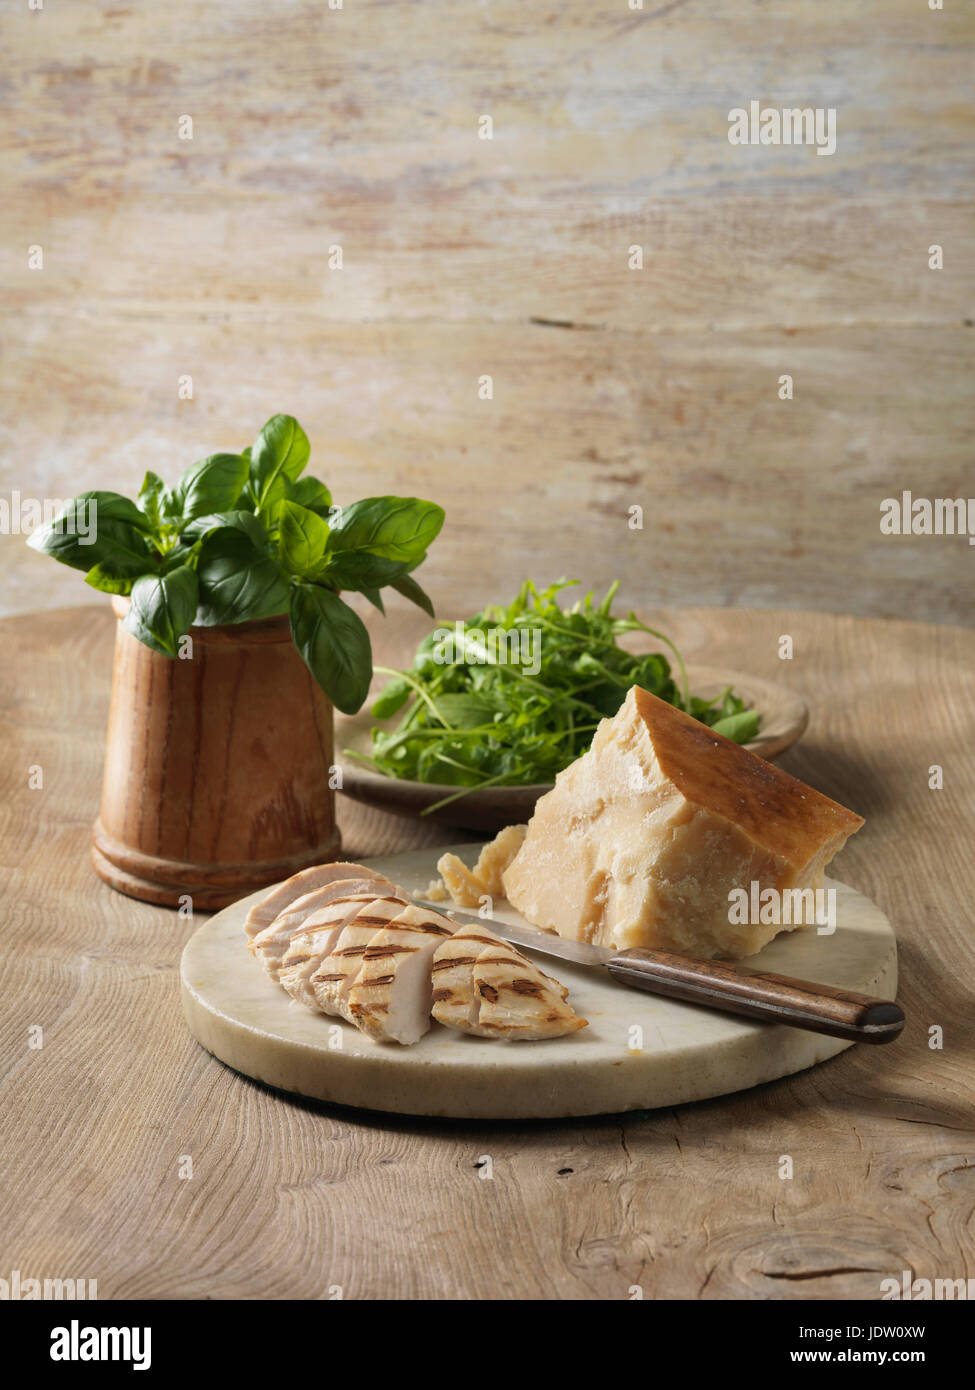 Plate of chicken, cheese and herbs Stock Photo